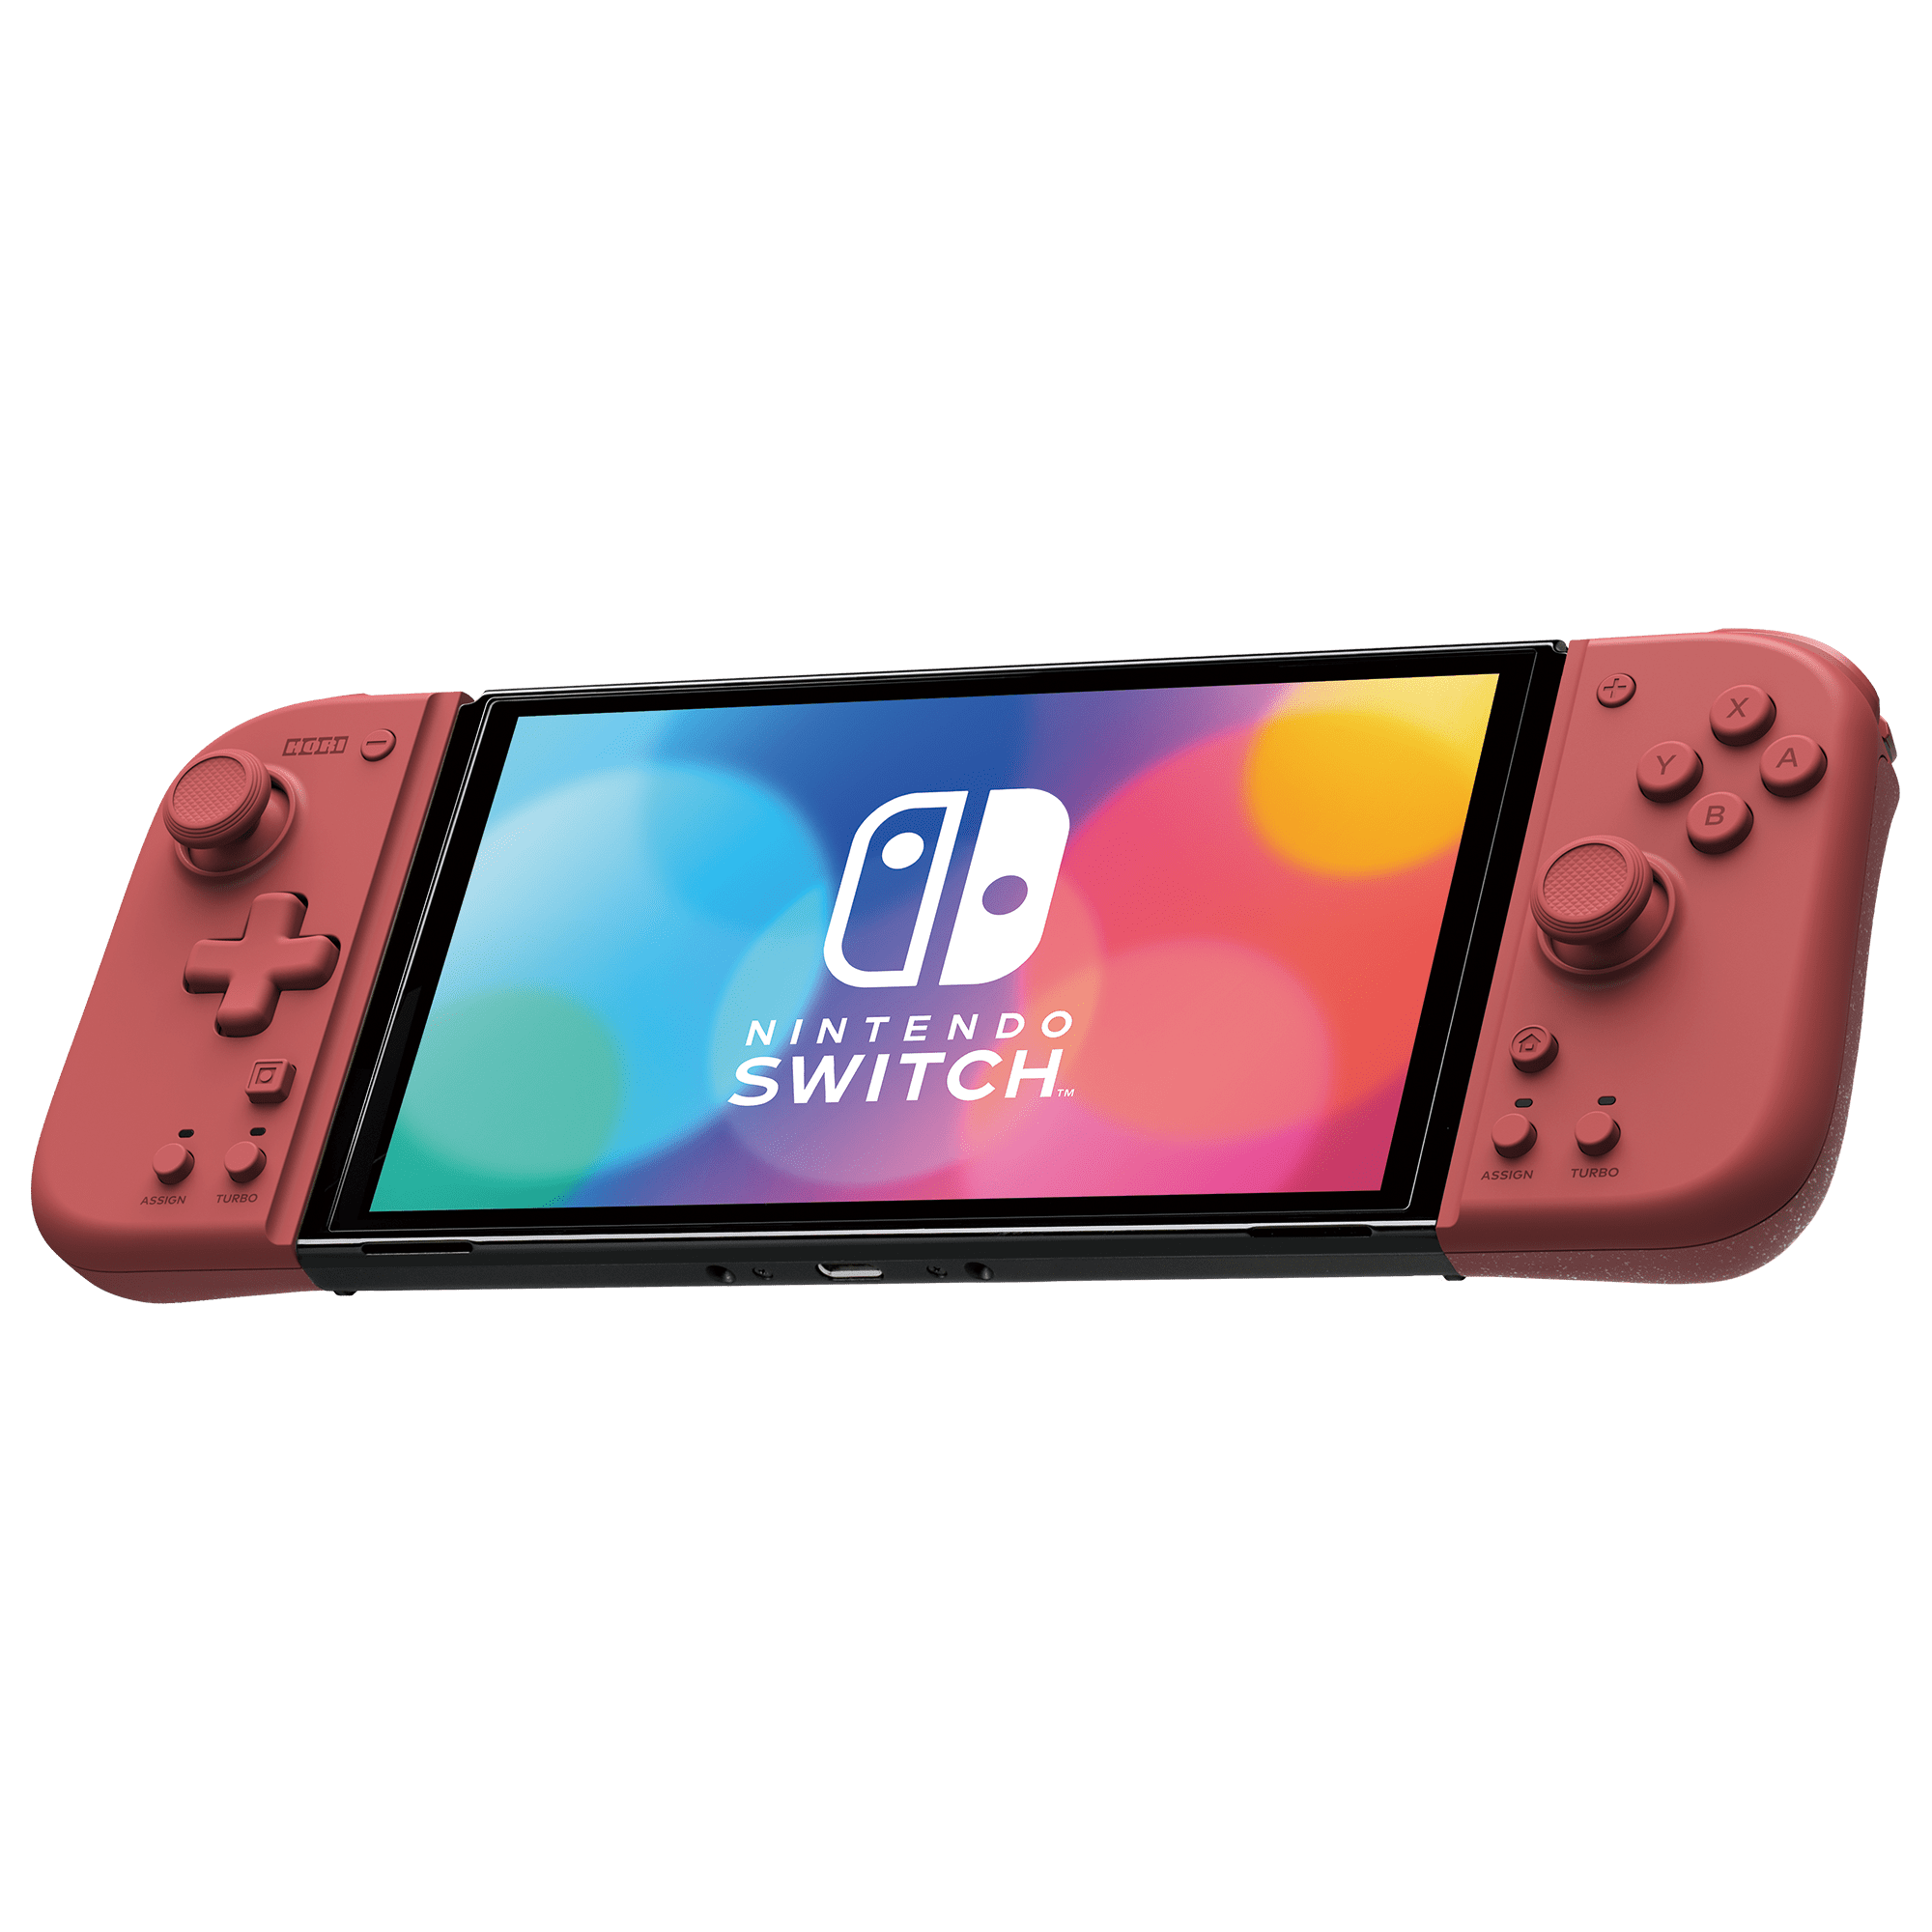 HORI Nintendo Switch and Nintendo Switch OLED Split Pad Compact Video Game  Controller, Apricot Red